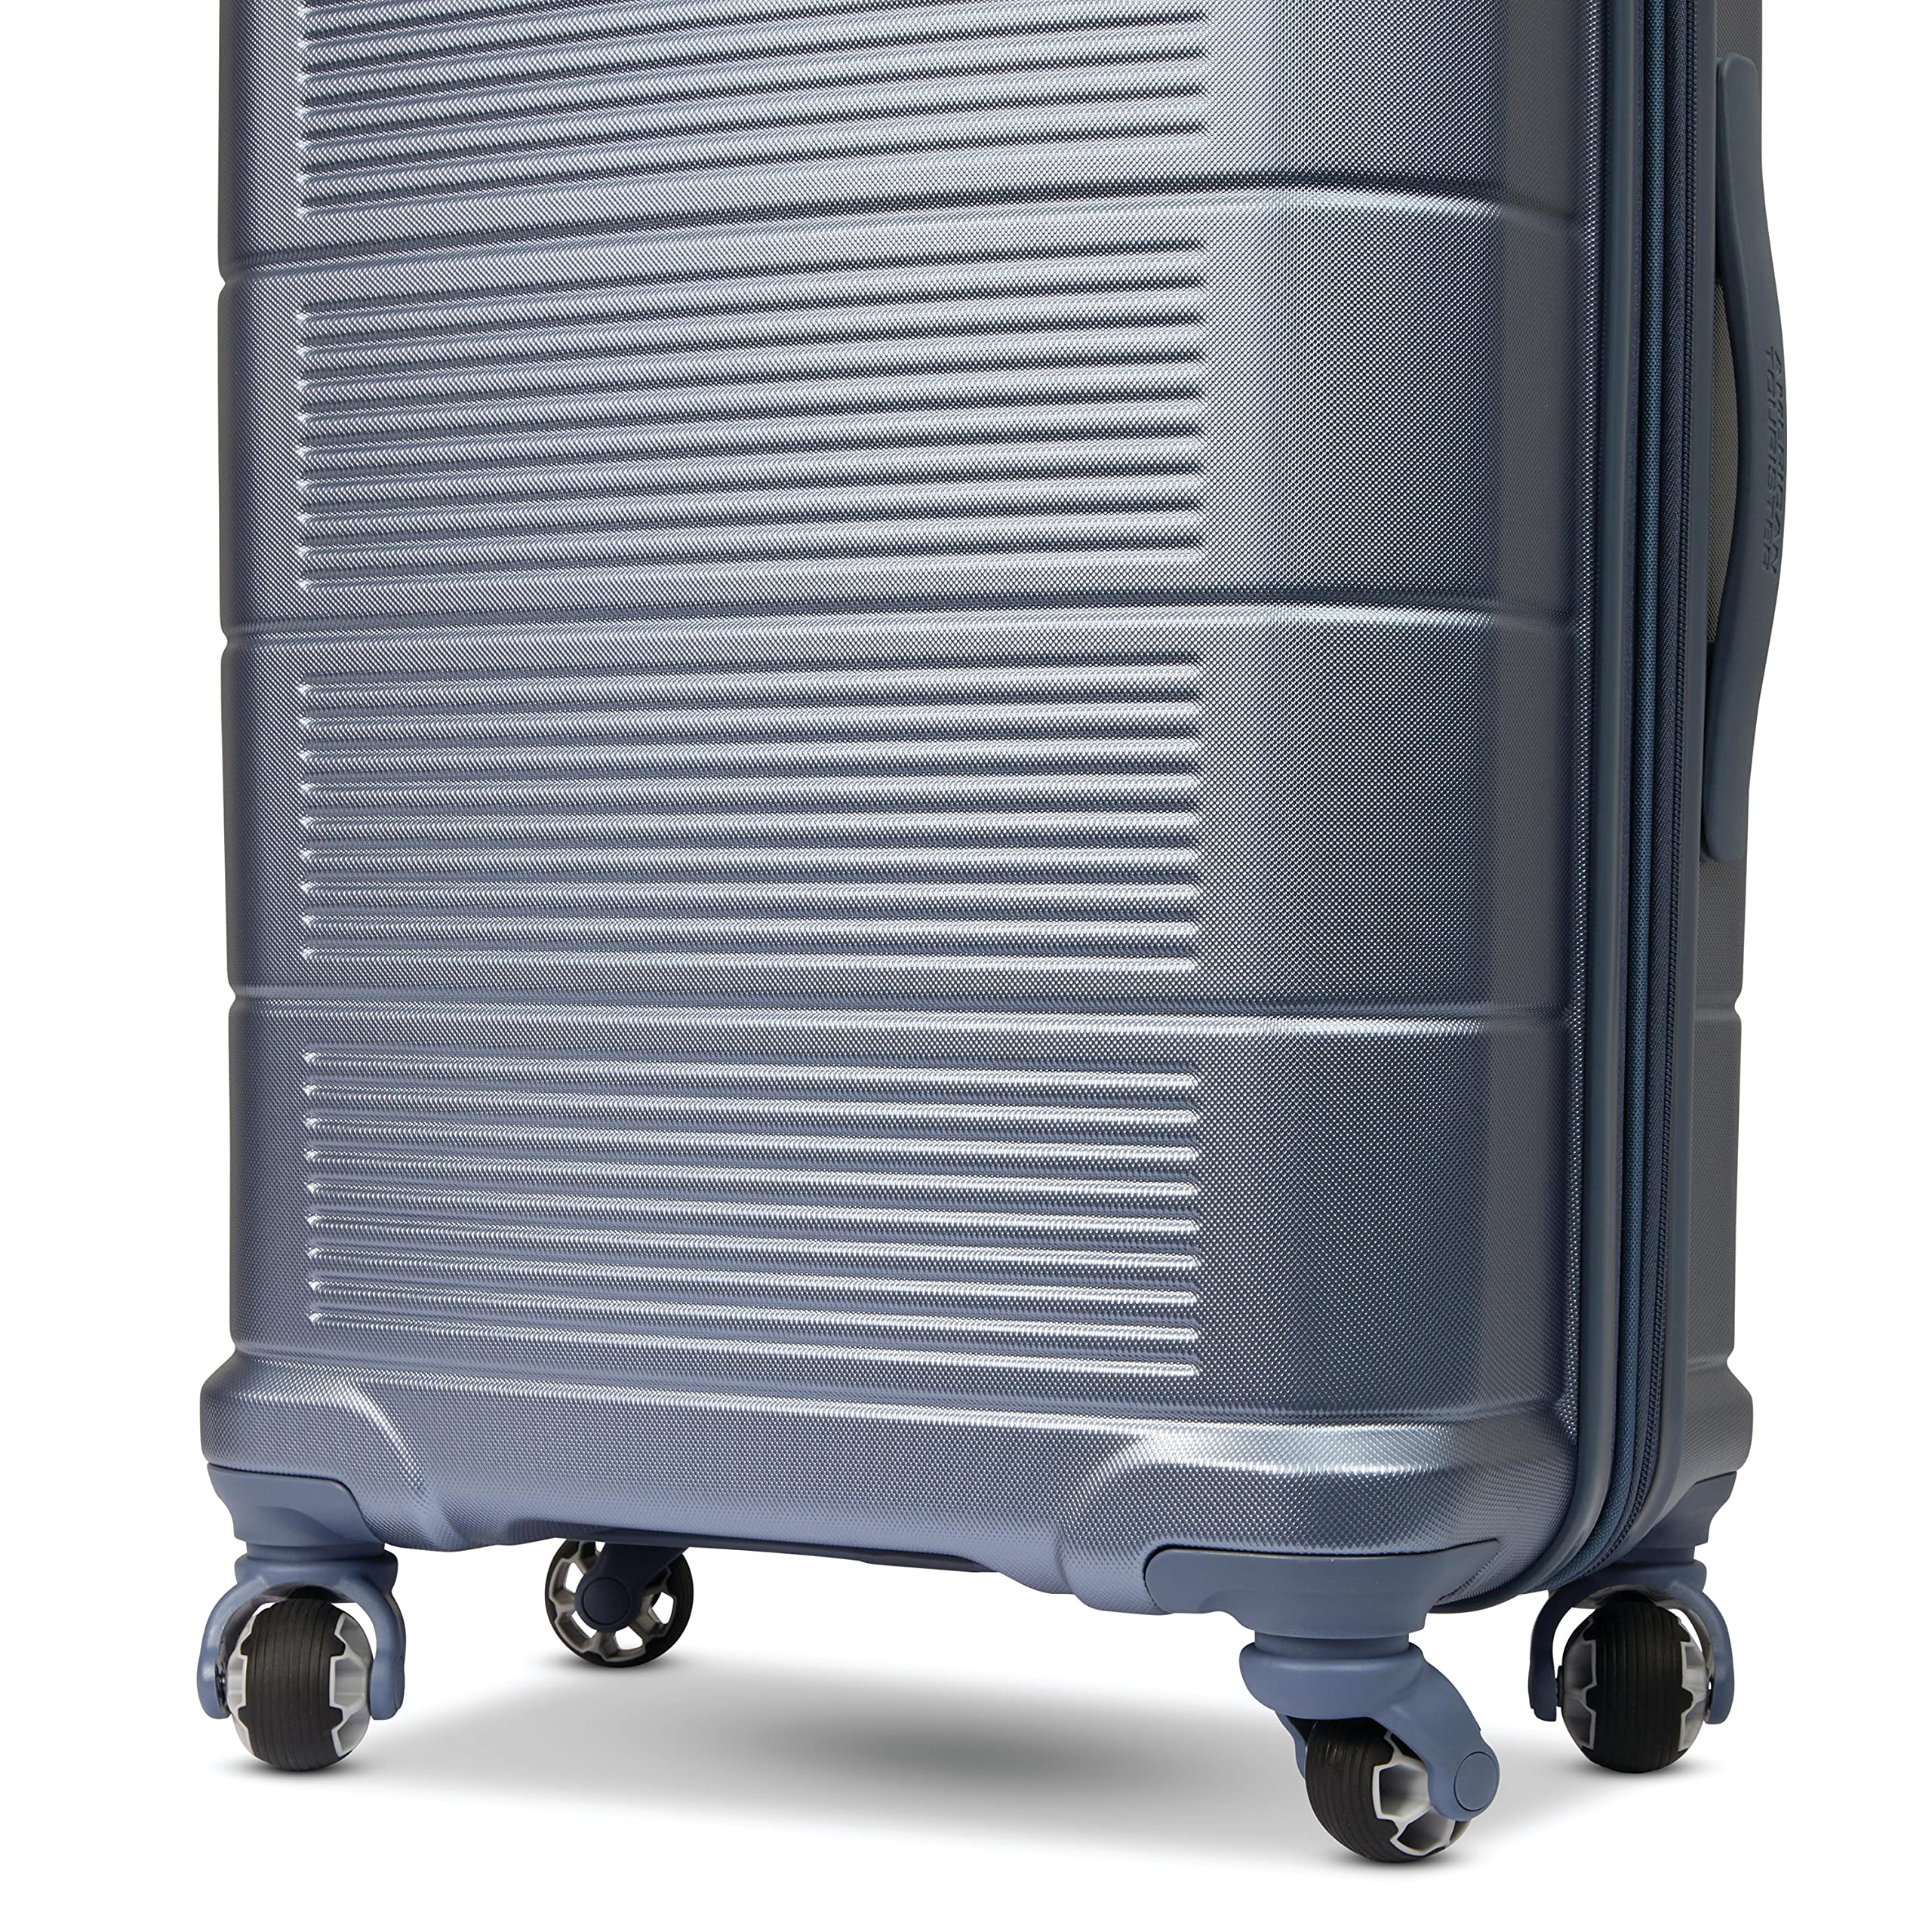 American Tourister Stratum 2.0 Expandable Hardside Luggage with Spinner Wheels, 28